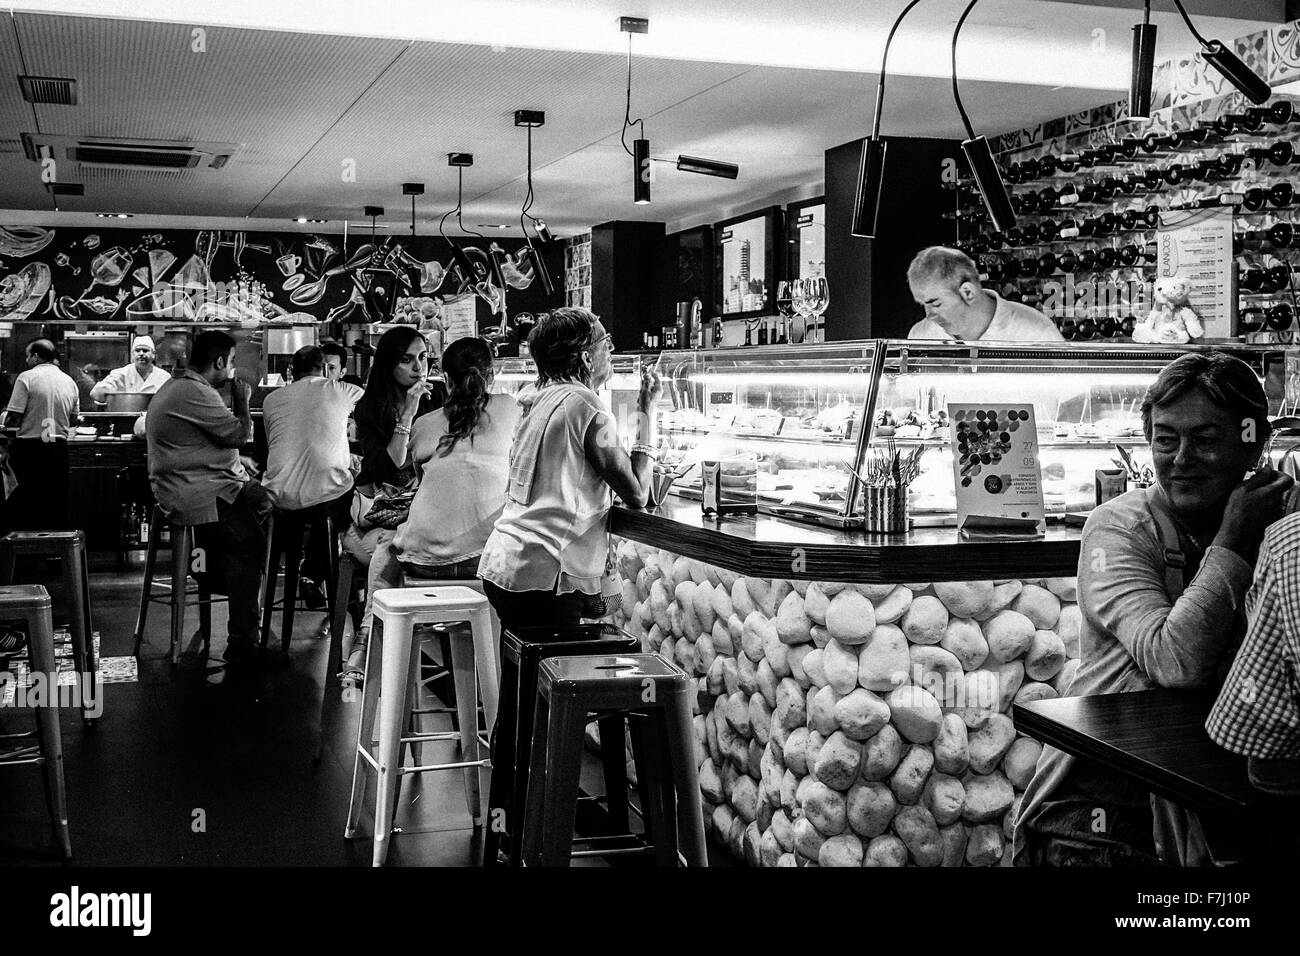 Tapas bar in busy Benidorm, old town, Spain. Black and white image, monochrome high contrast grainy. Stock Photo